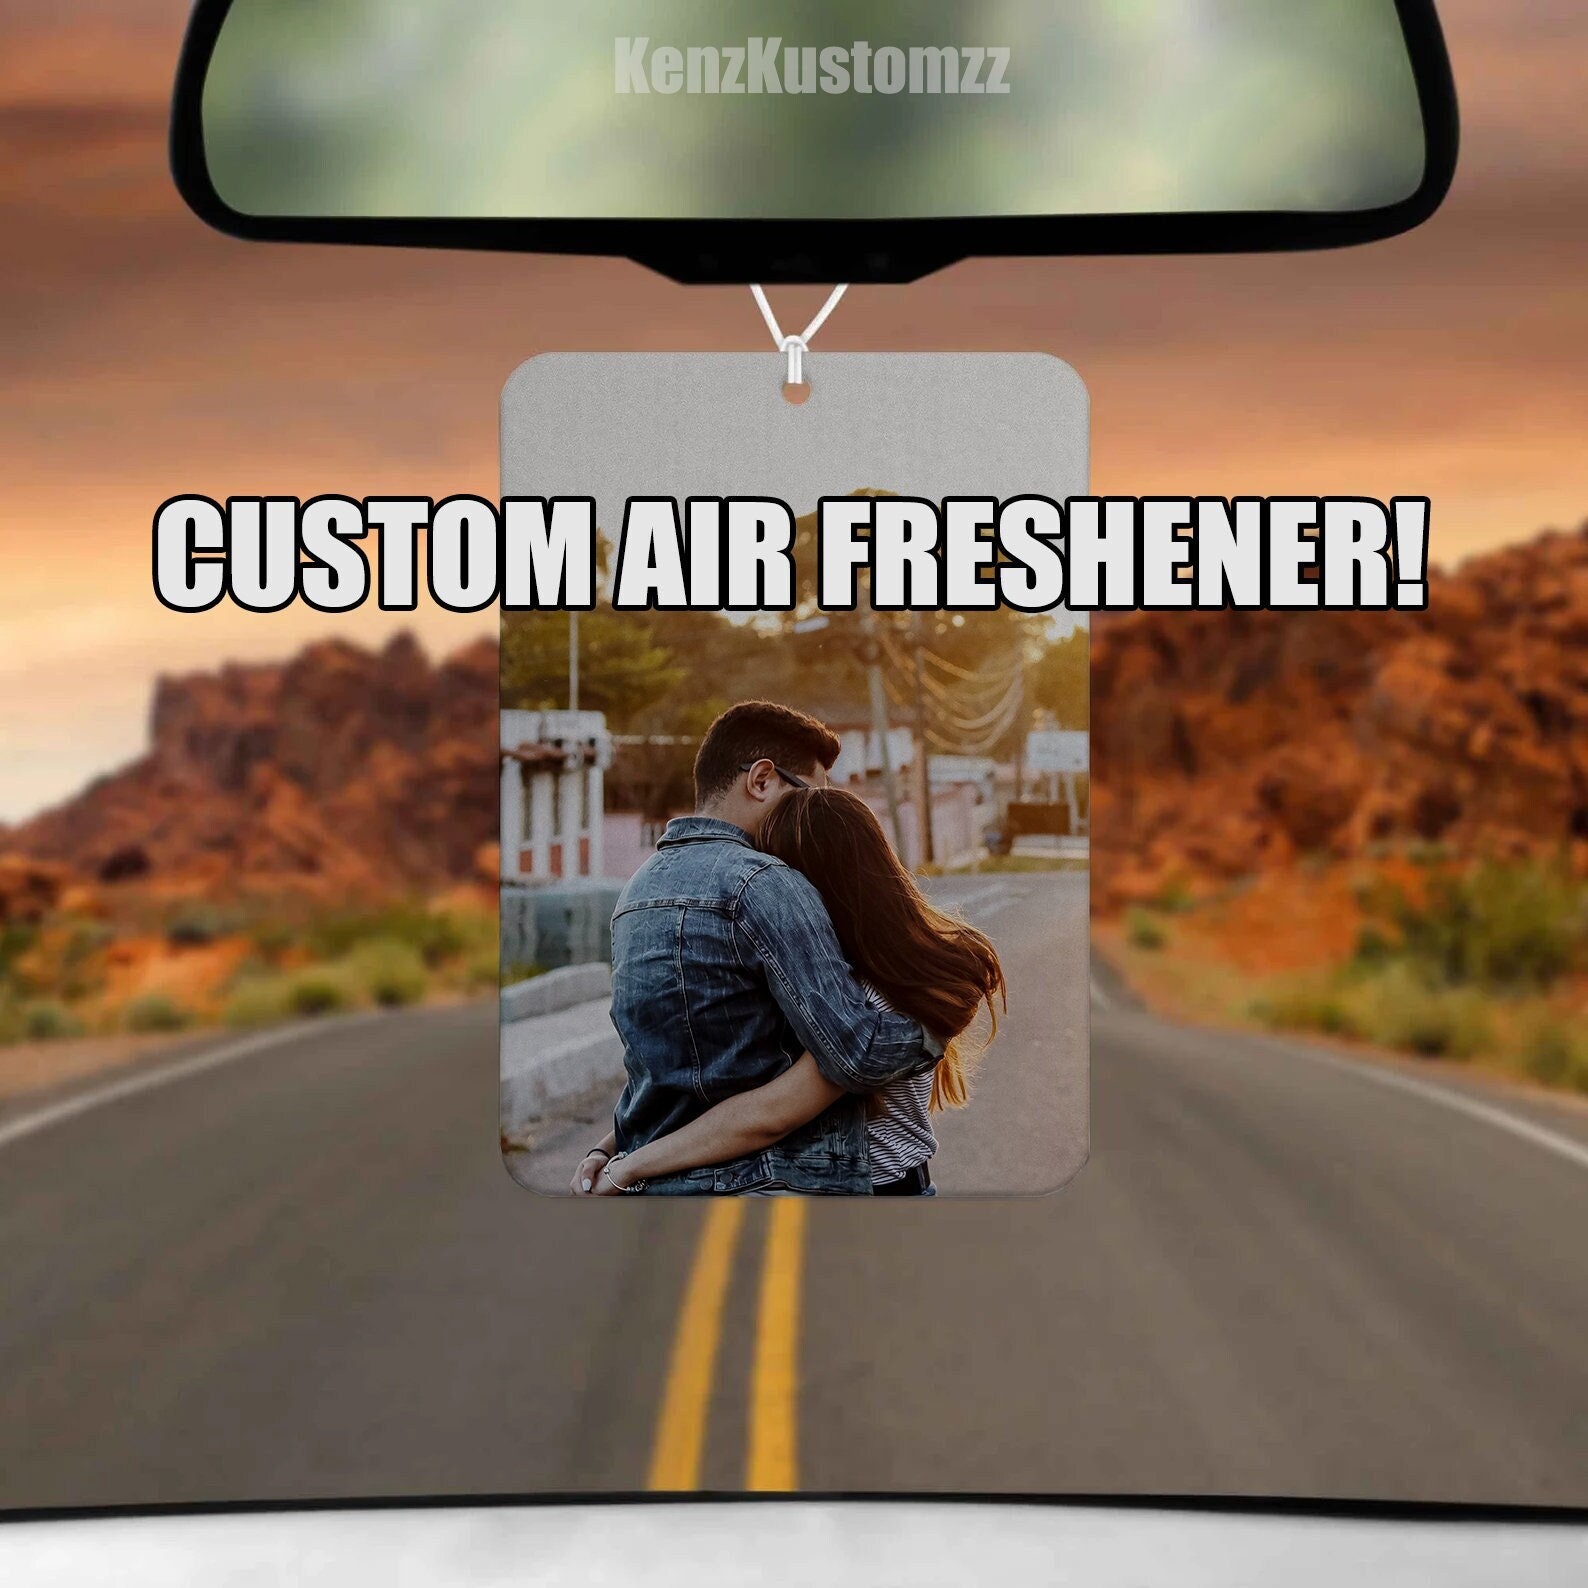 Funny Meme Car Air Fresheners ,car Decor, Stylish and Funny Odour Fighter,  Humor Gift for Men and Women 